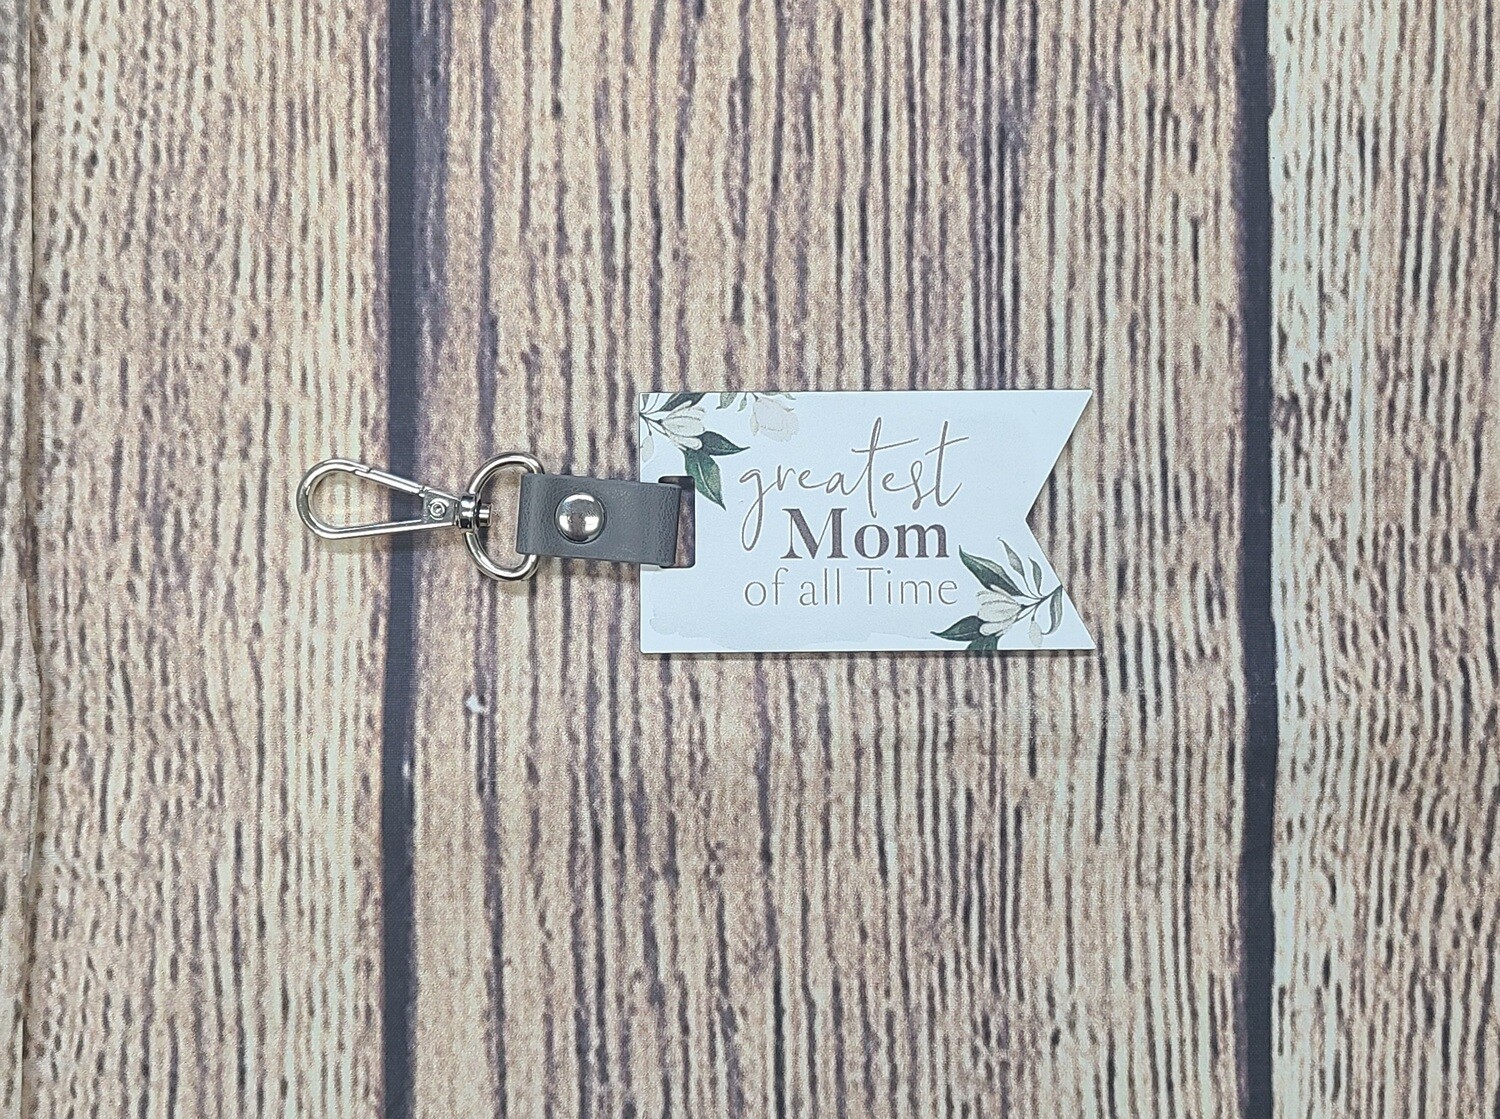 Greatest Mom of all Time Key Chain